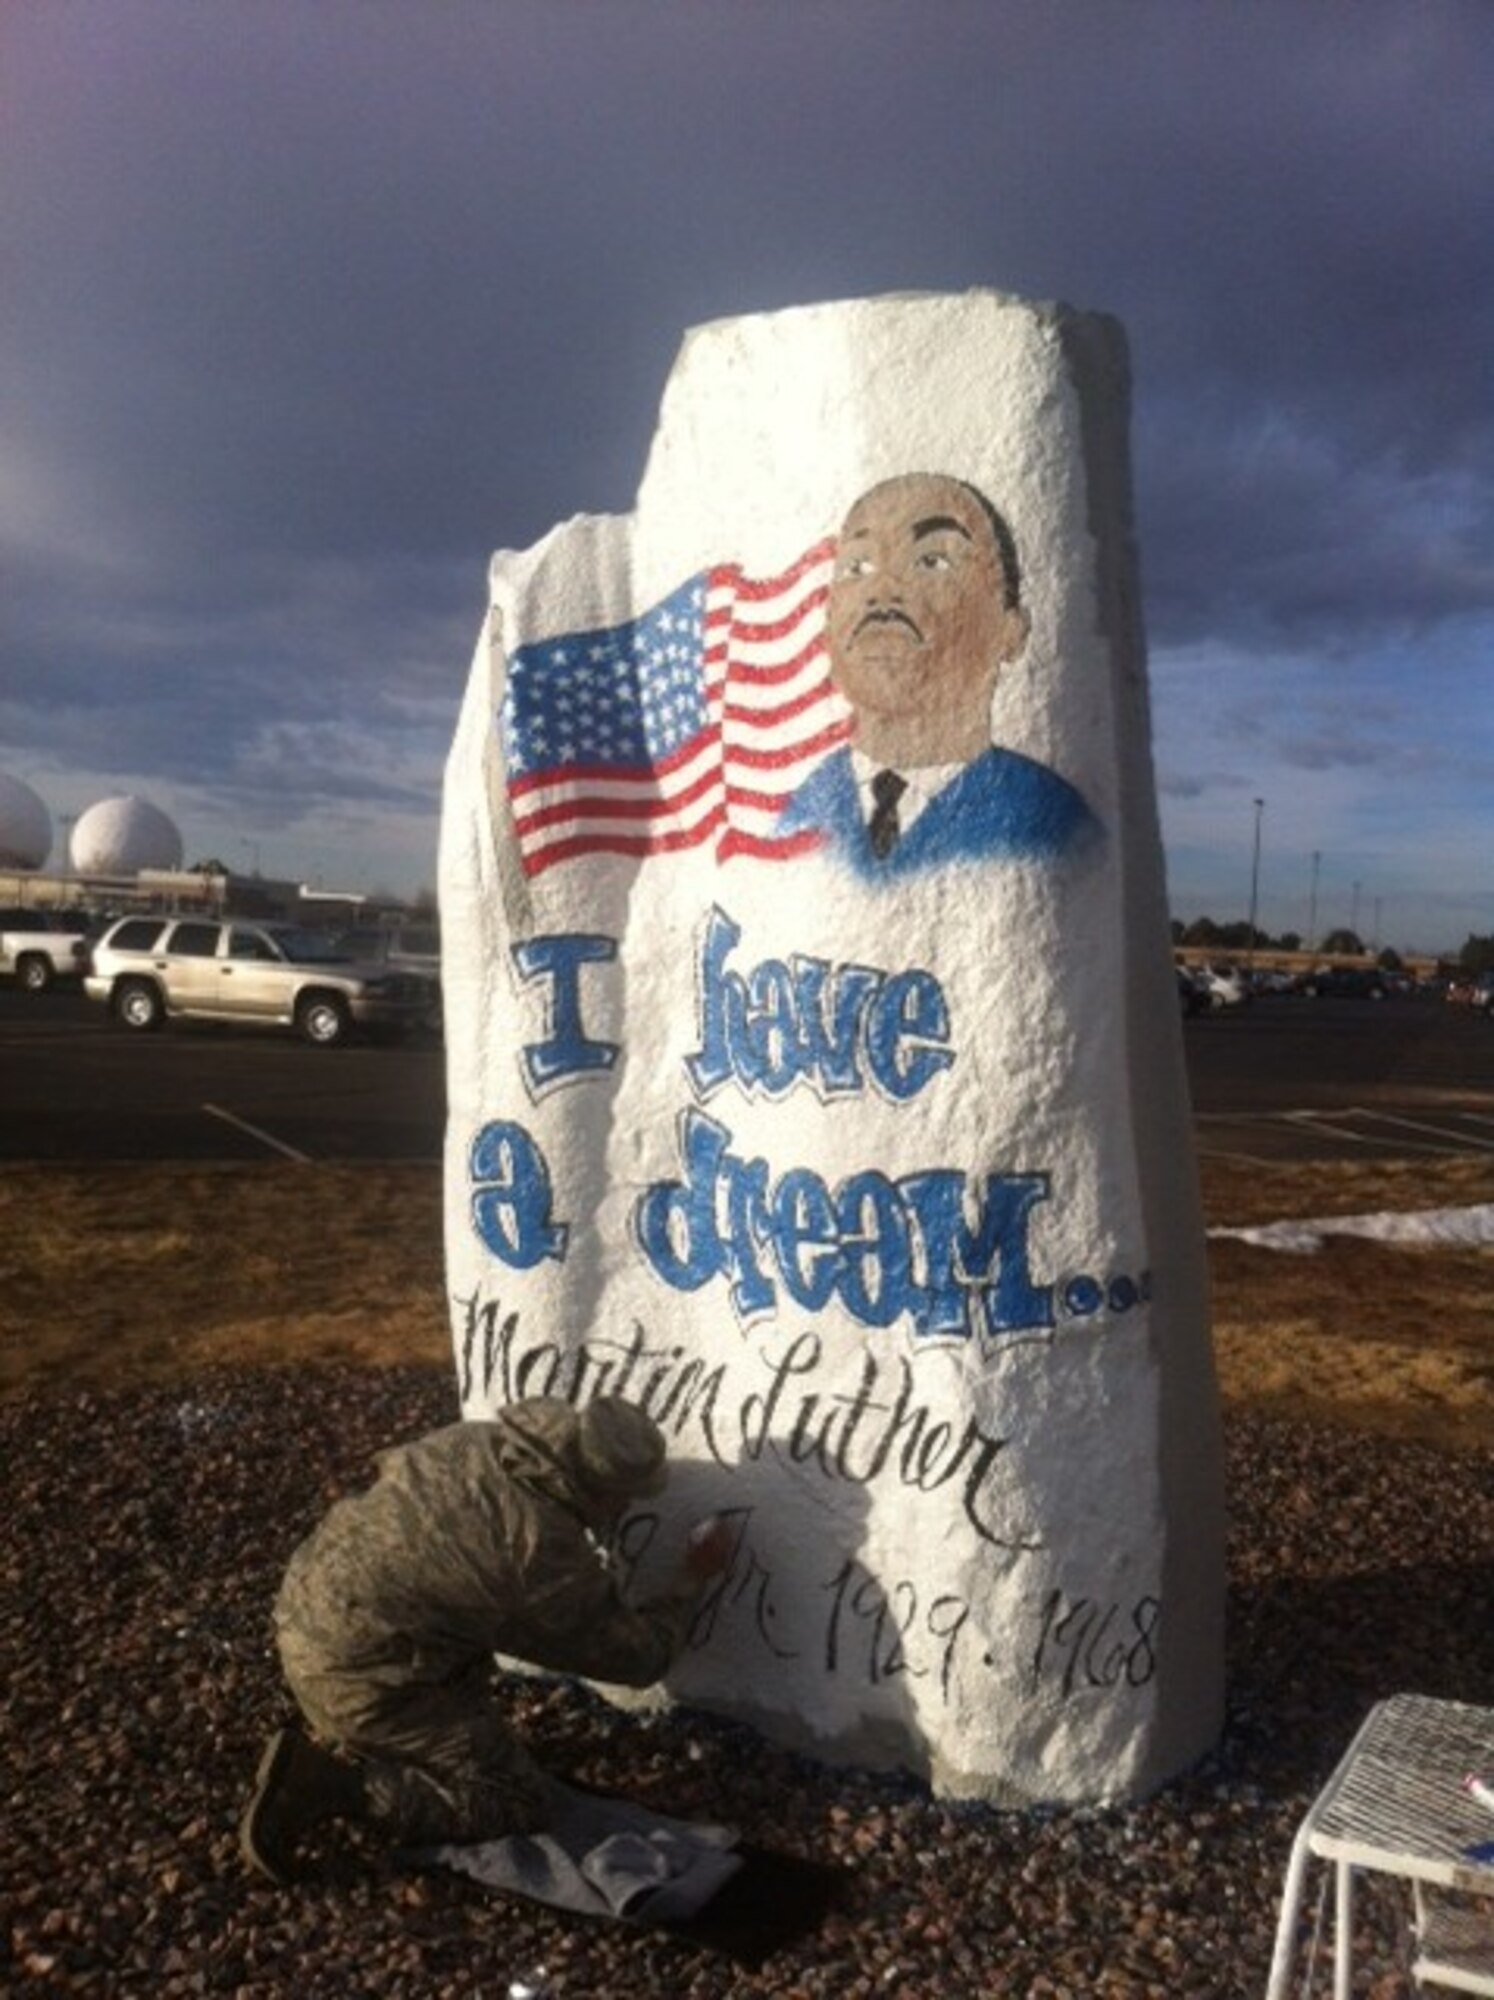 Staff Sgt. Alfonso Martinez, 460th Logistics Readiness Squadron, paints a commemorative image in honor of Dr. Martin Luther King Jr. Jan. 17, 2014, on the Spirit Rock at Buckley Air Force Base, Colo. Dr. Martin Luther King Jr. Day is a federal holiday observed on the third Monday of each January in honor of King, a key leader in civil rights movements. (Courtesy photo)  